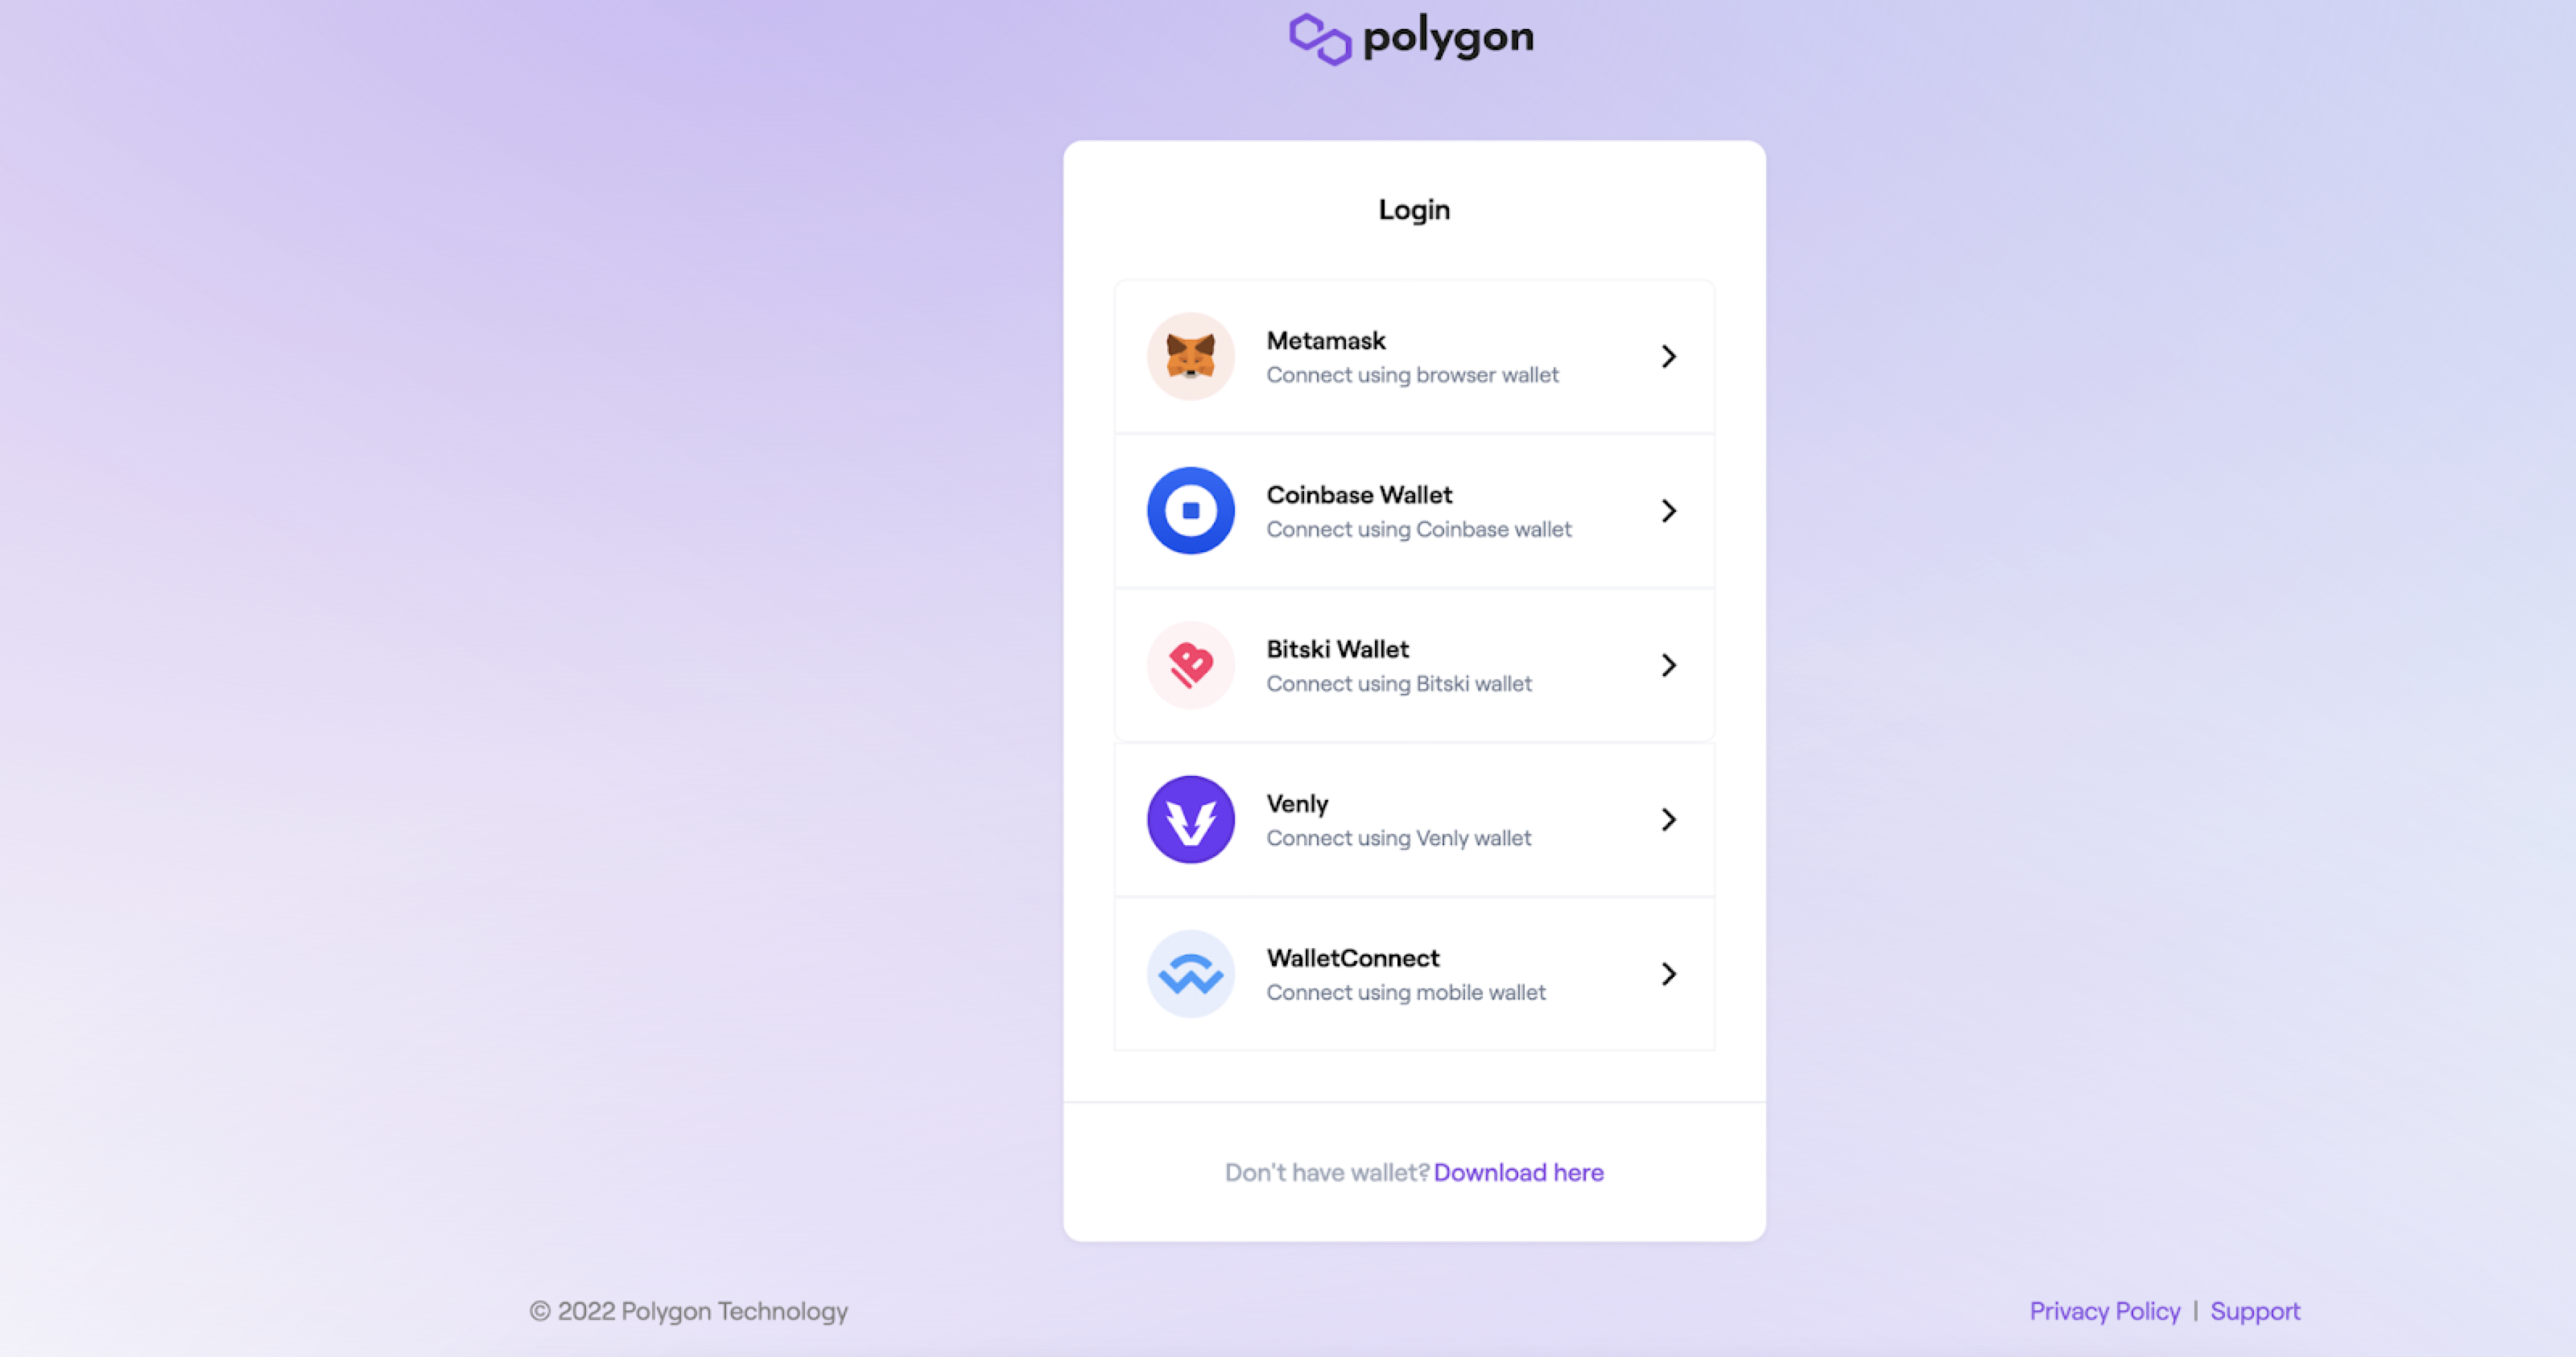 Select your self-custody wallet from the Polygon Login list.